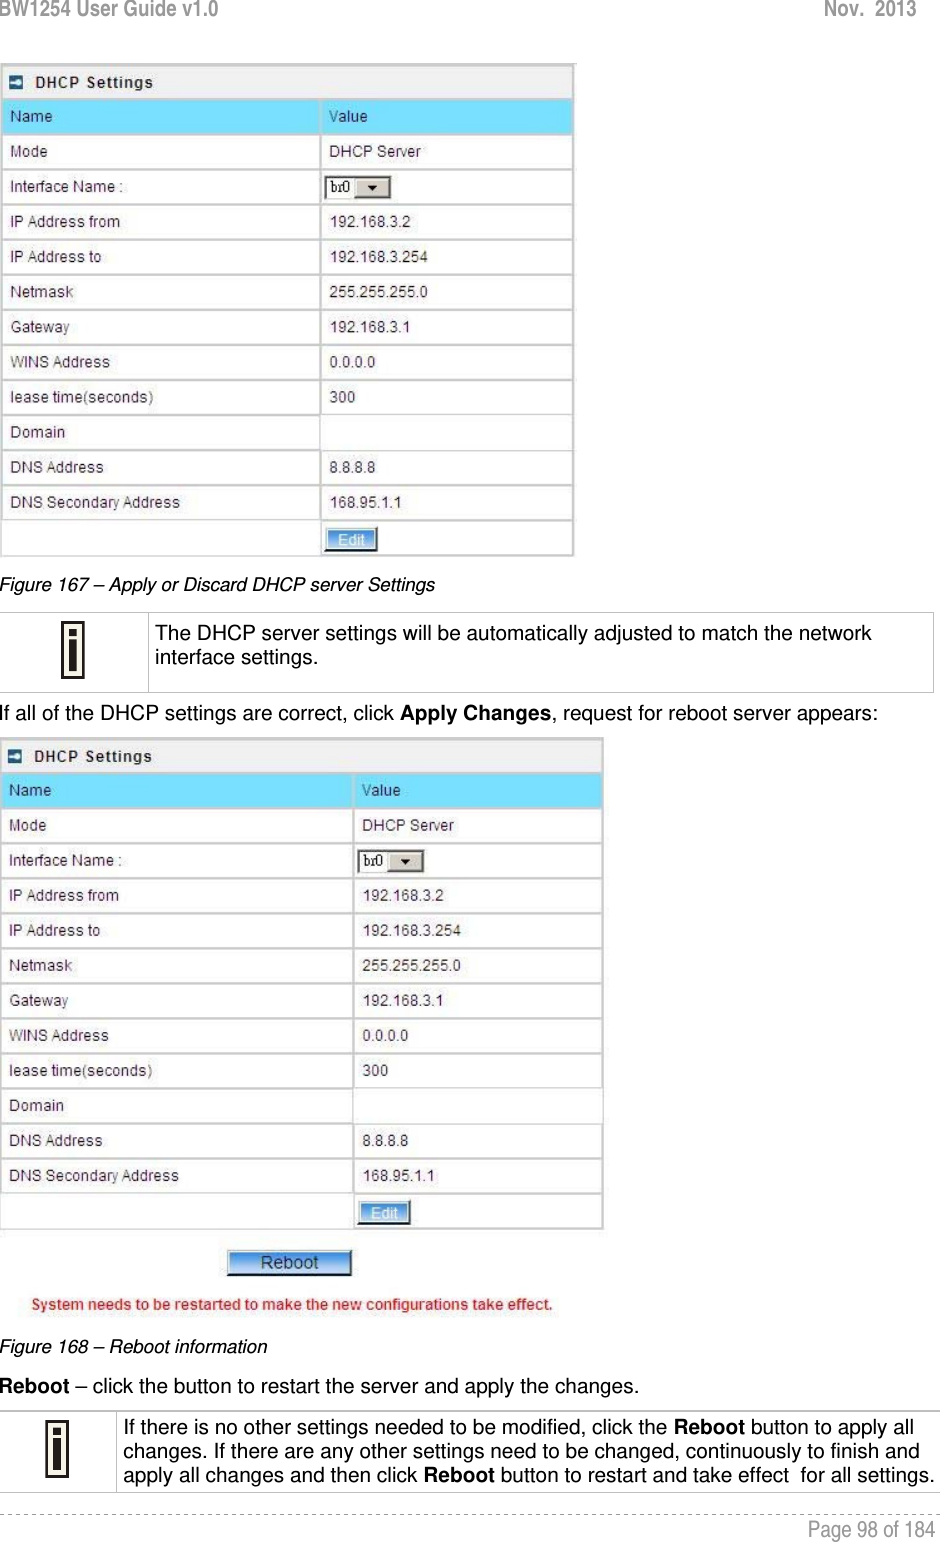 BW1254 User Guide v1.0  Nov.  2013     Page 98 of 184    Figure 167 – Apply or Discard DHCP server Settings  The DHCP server settings will be automatically adjusted to match the network interface settings. If all of the DHCP settings are correct, click Apply Changes, request for reboot server appears:  Figure 168 – Reboot information Reboot – click the button to restart the server and apply the changes.  If there is no other settings needed to be modified, click the Reboot button to apply all changes. If there are any other settings need to be changed, continuously to finish and apply all changes and then click Reboot button to restart and take effect  for all settings.